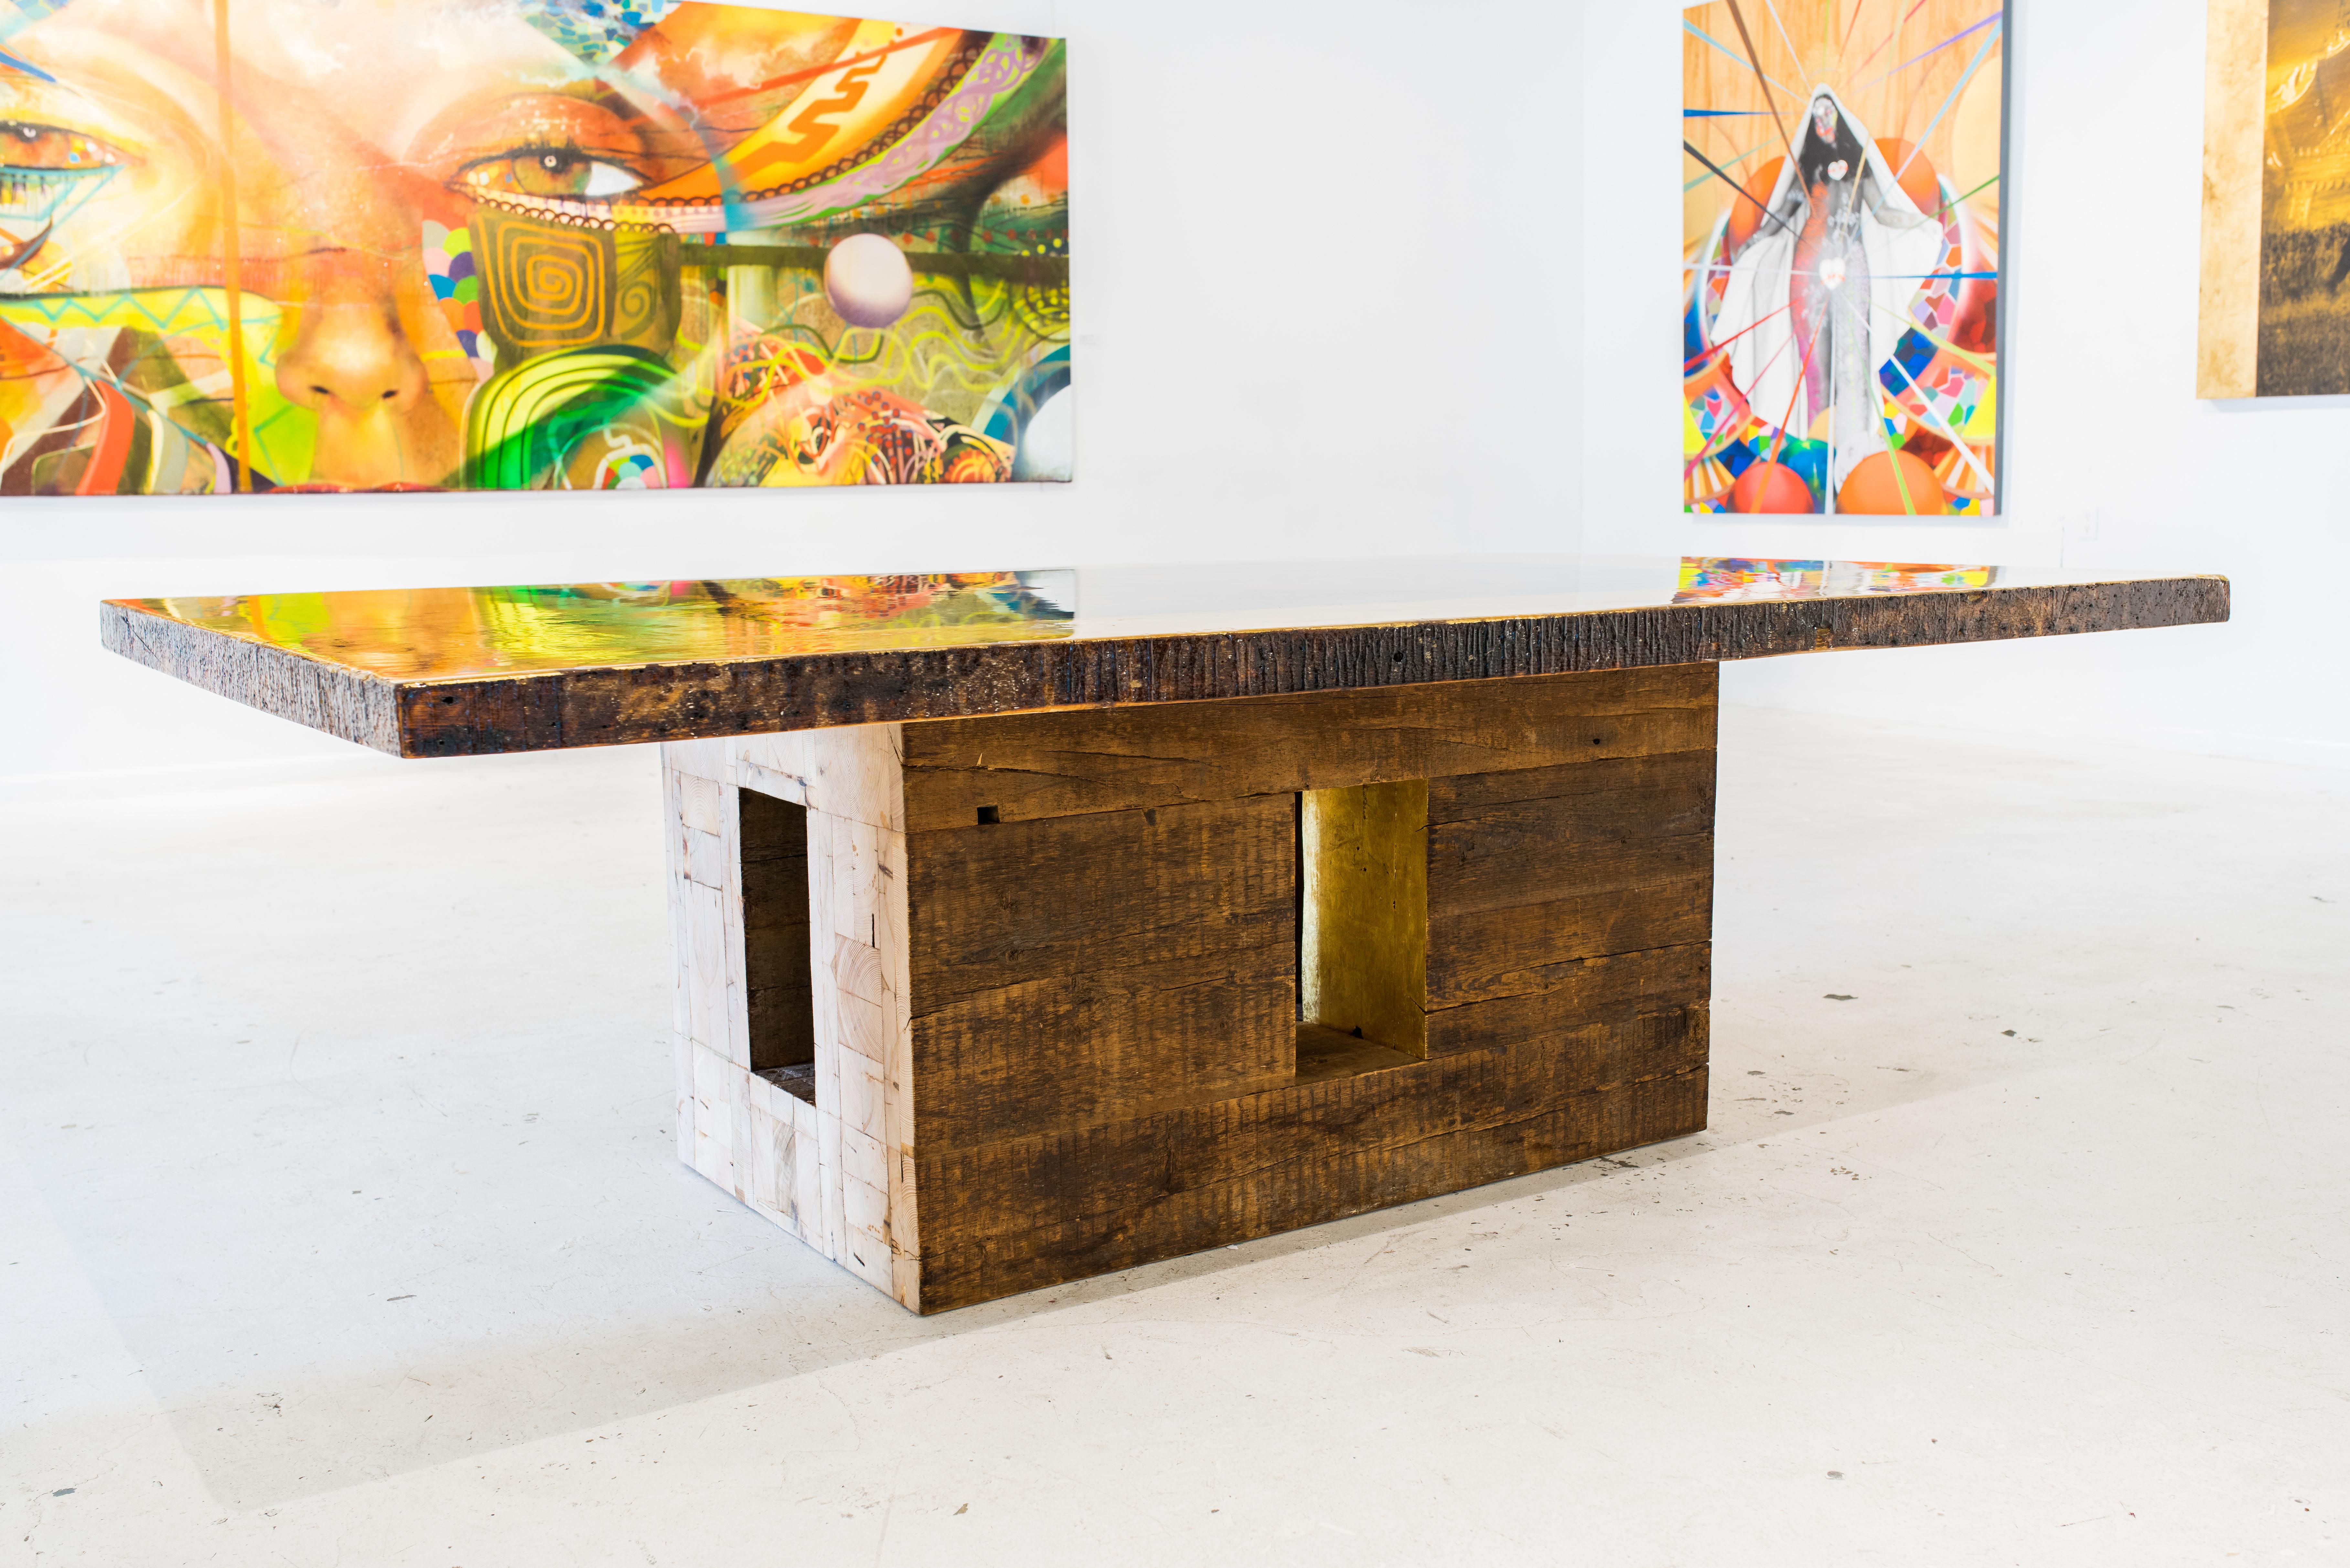 Gilt Fascinasia Dining Table, Handcrafted by Rafael Calvo using Reclaimed Wood For Sale